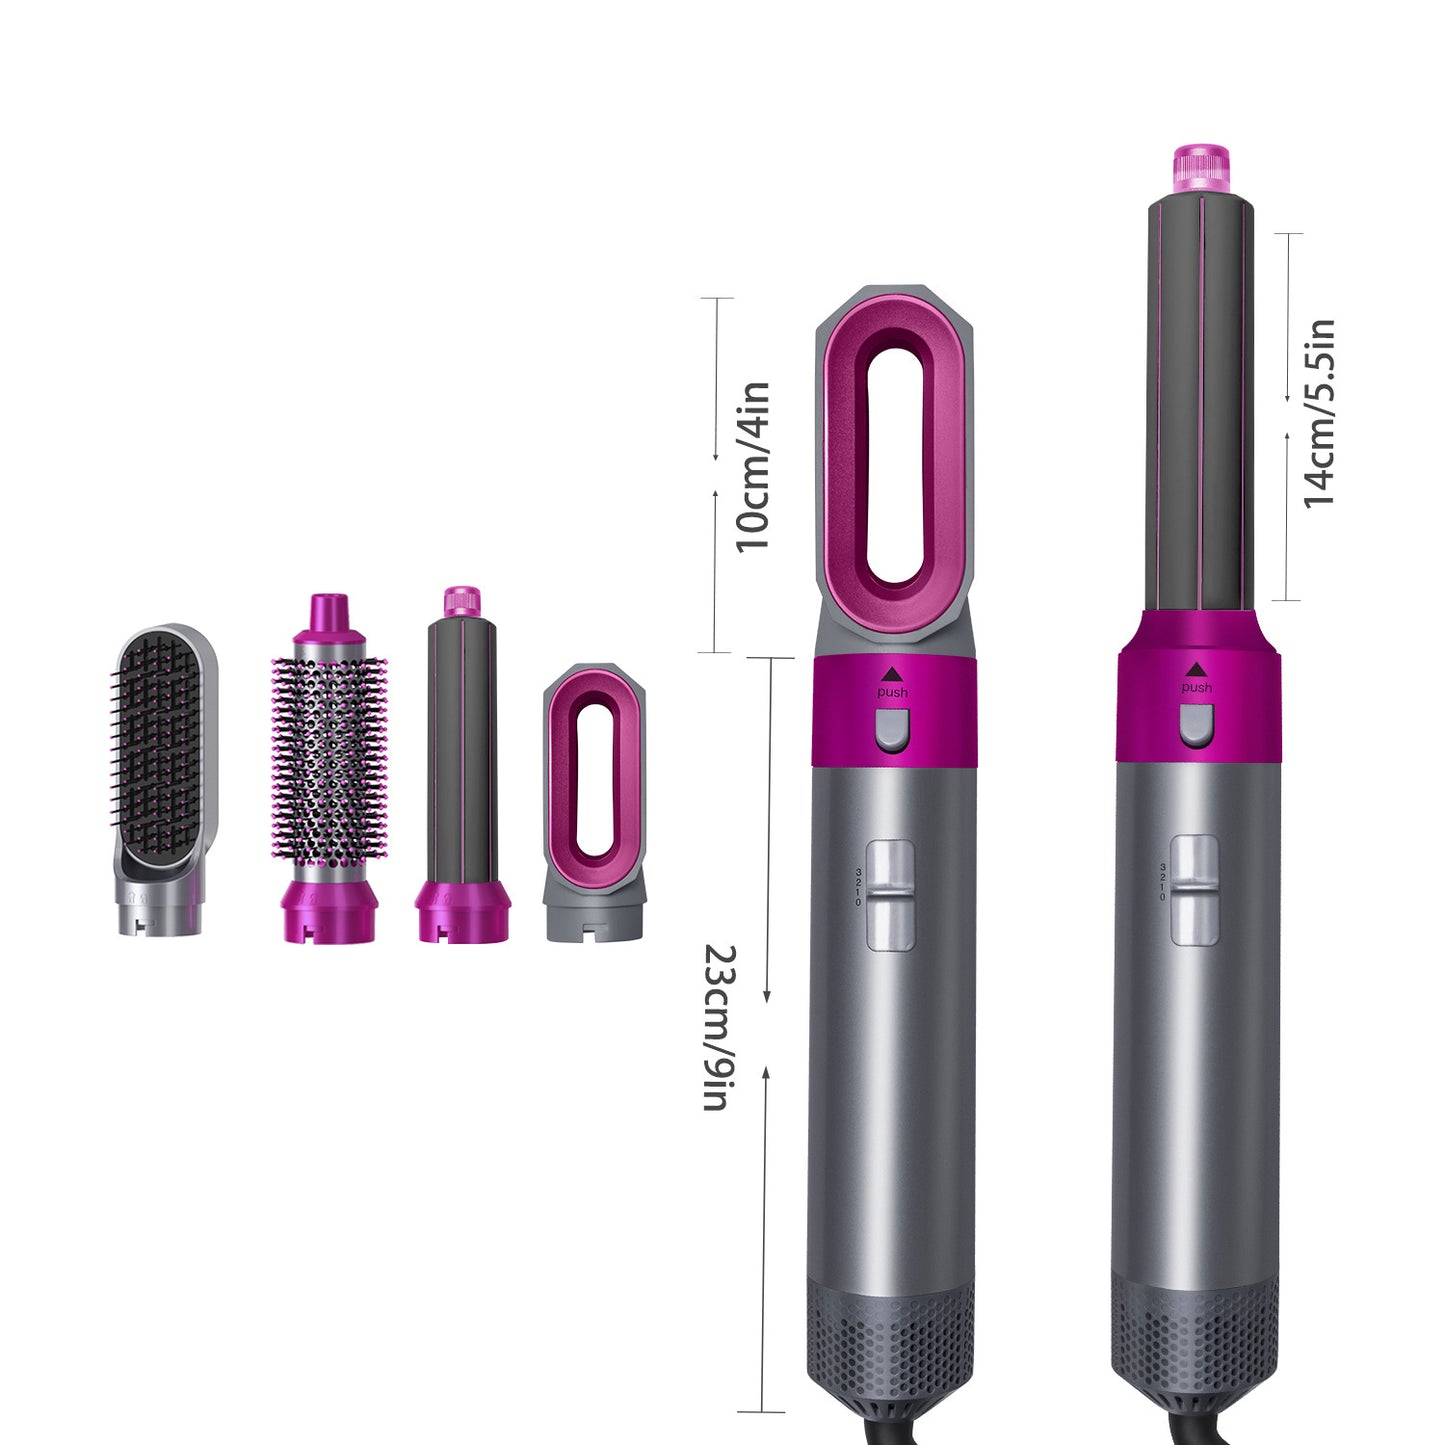 New multi functional five in one hot air comb multi head automatic curler hair dryer straight hair comb curling rod factory in China wholesale